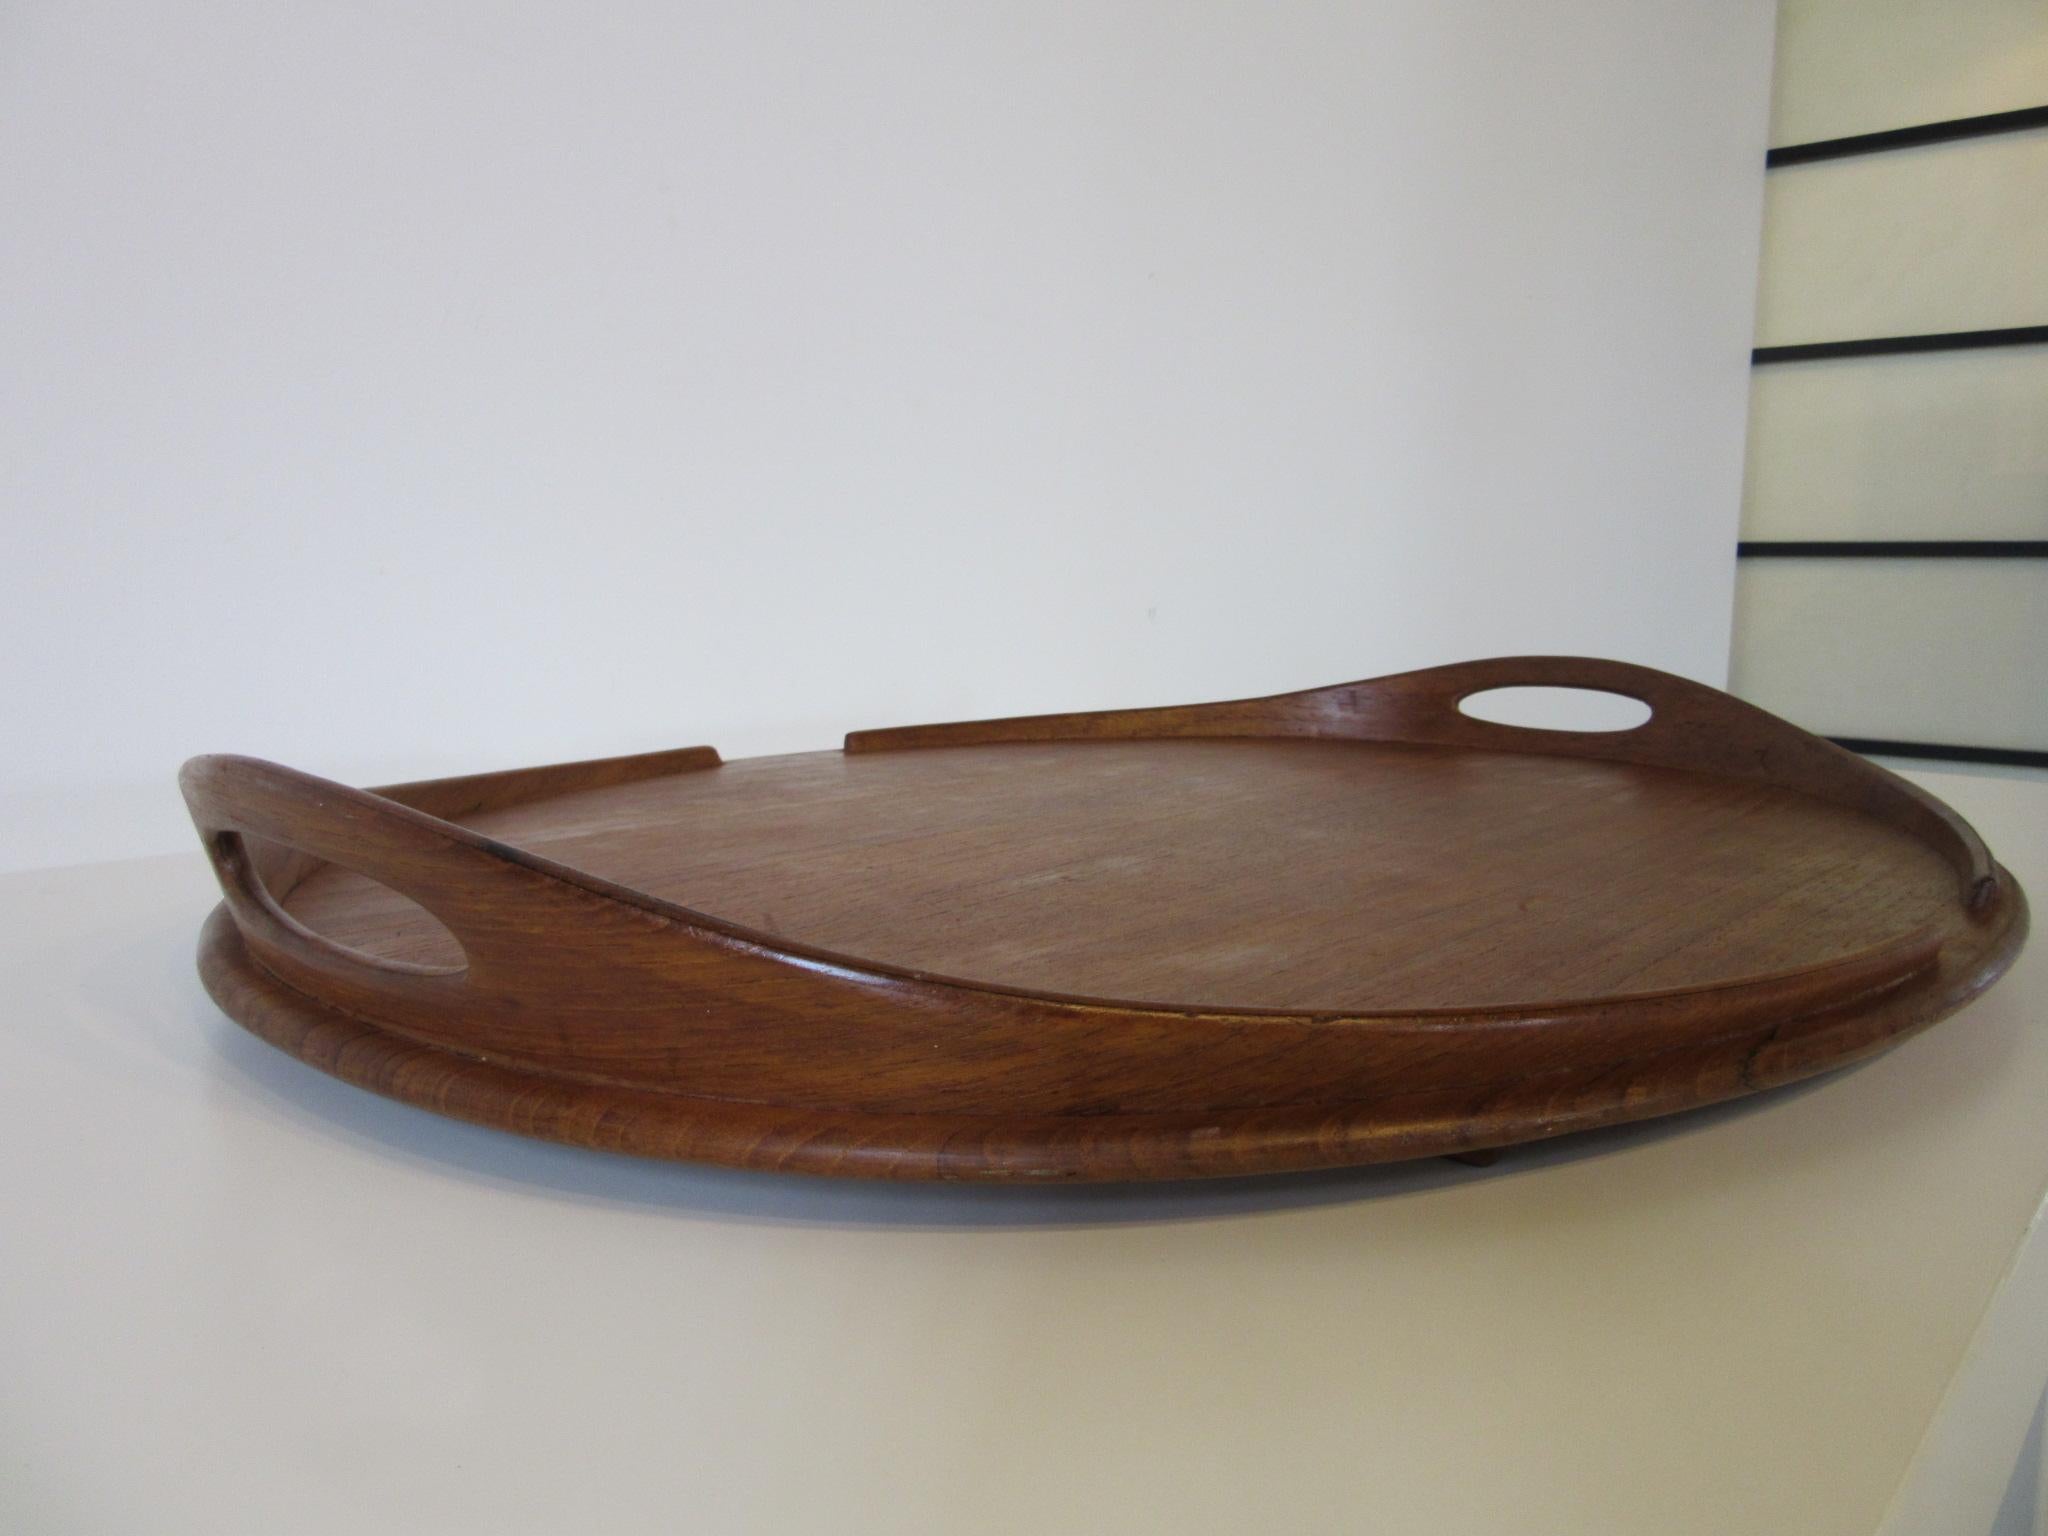 A very large and wonderful teak wood tray with sculptural handles and edge trim, the bottom has runners and is branded Dansk Denmark with the four ducks mark making this a early production piece from the manufacturer.